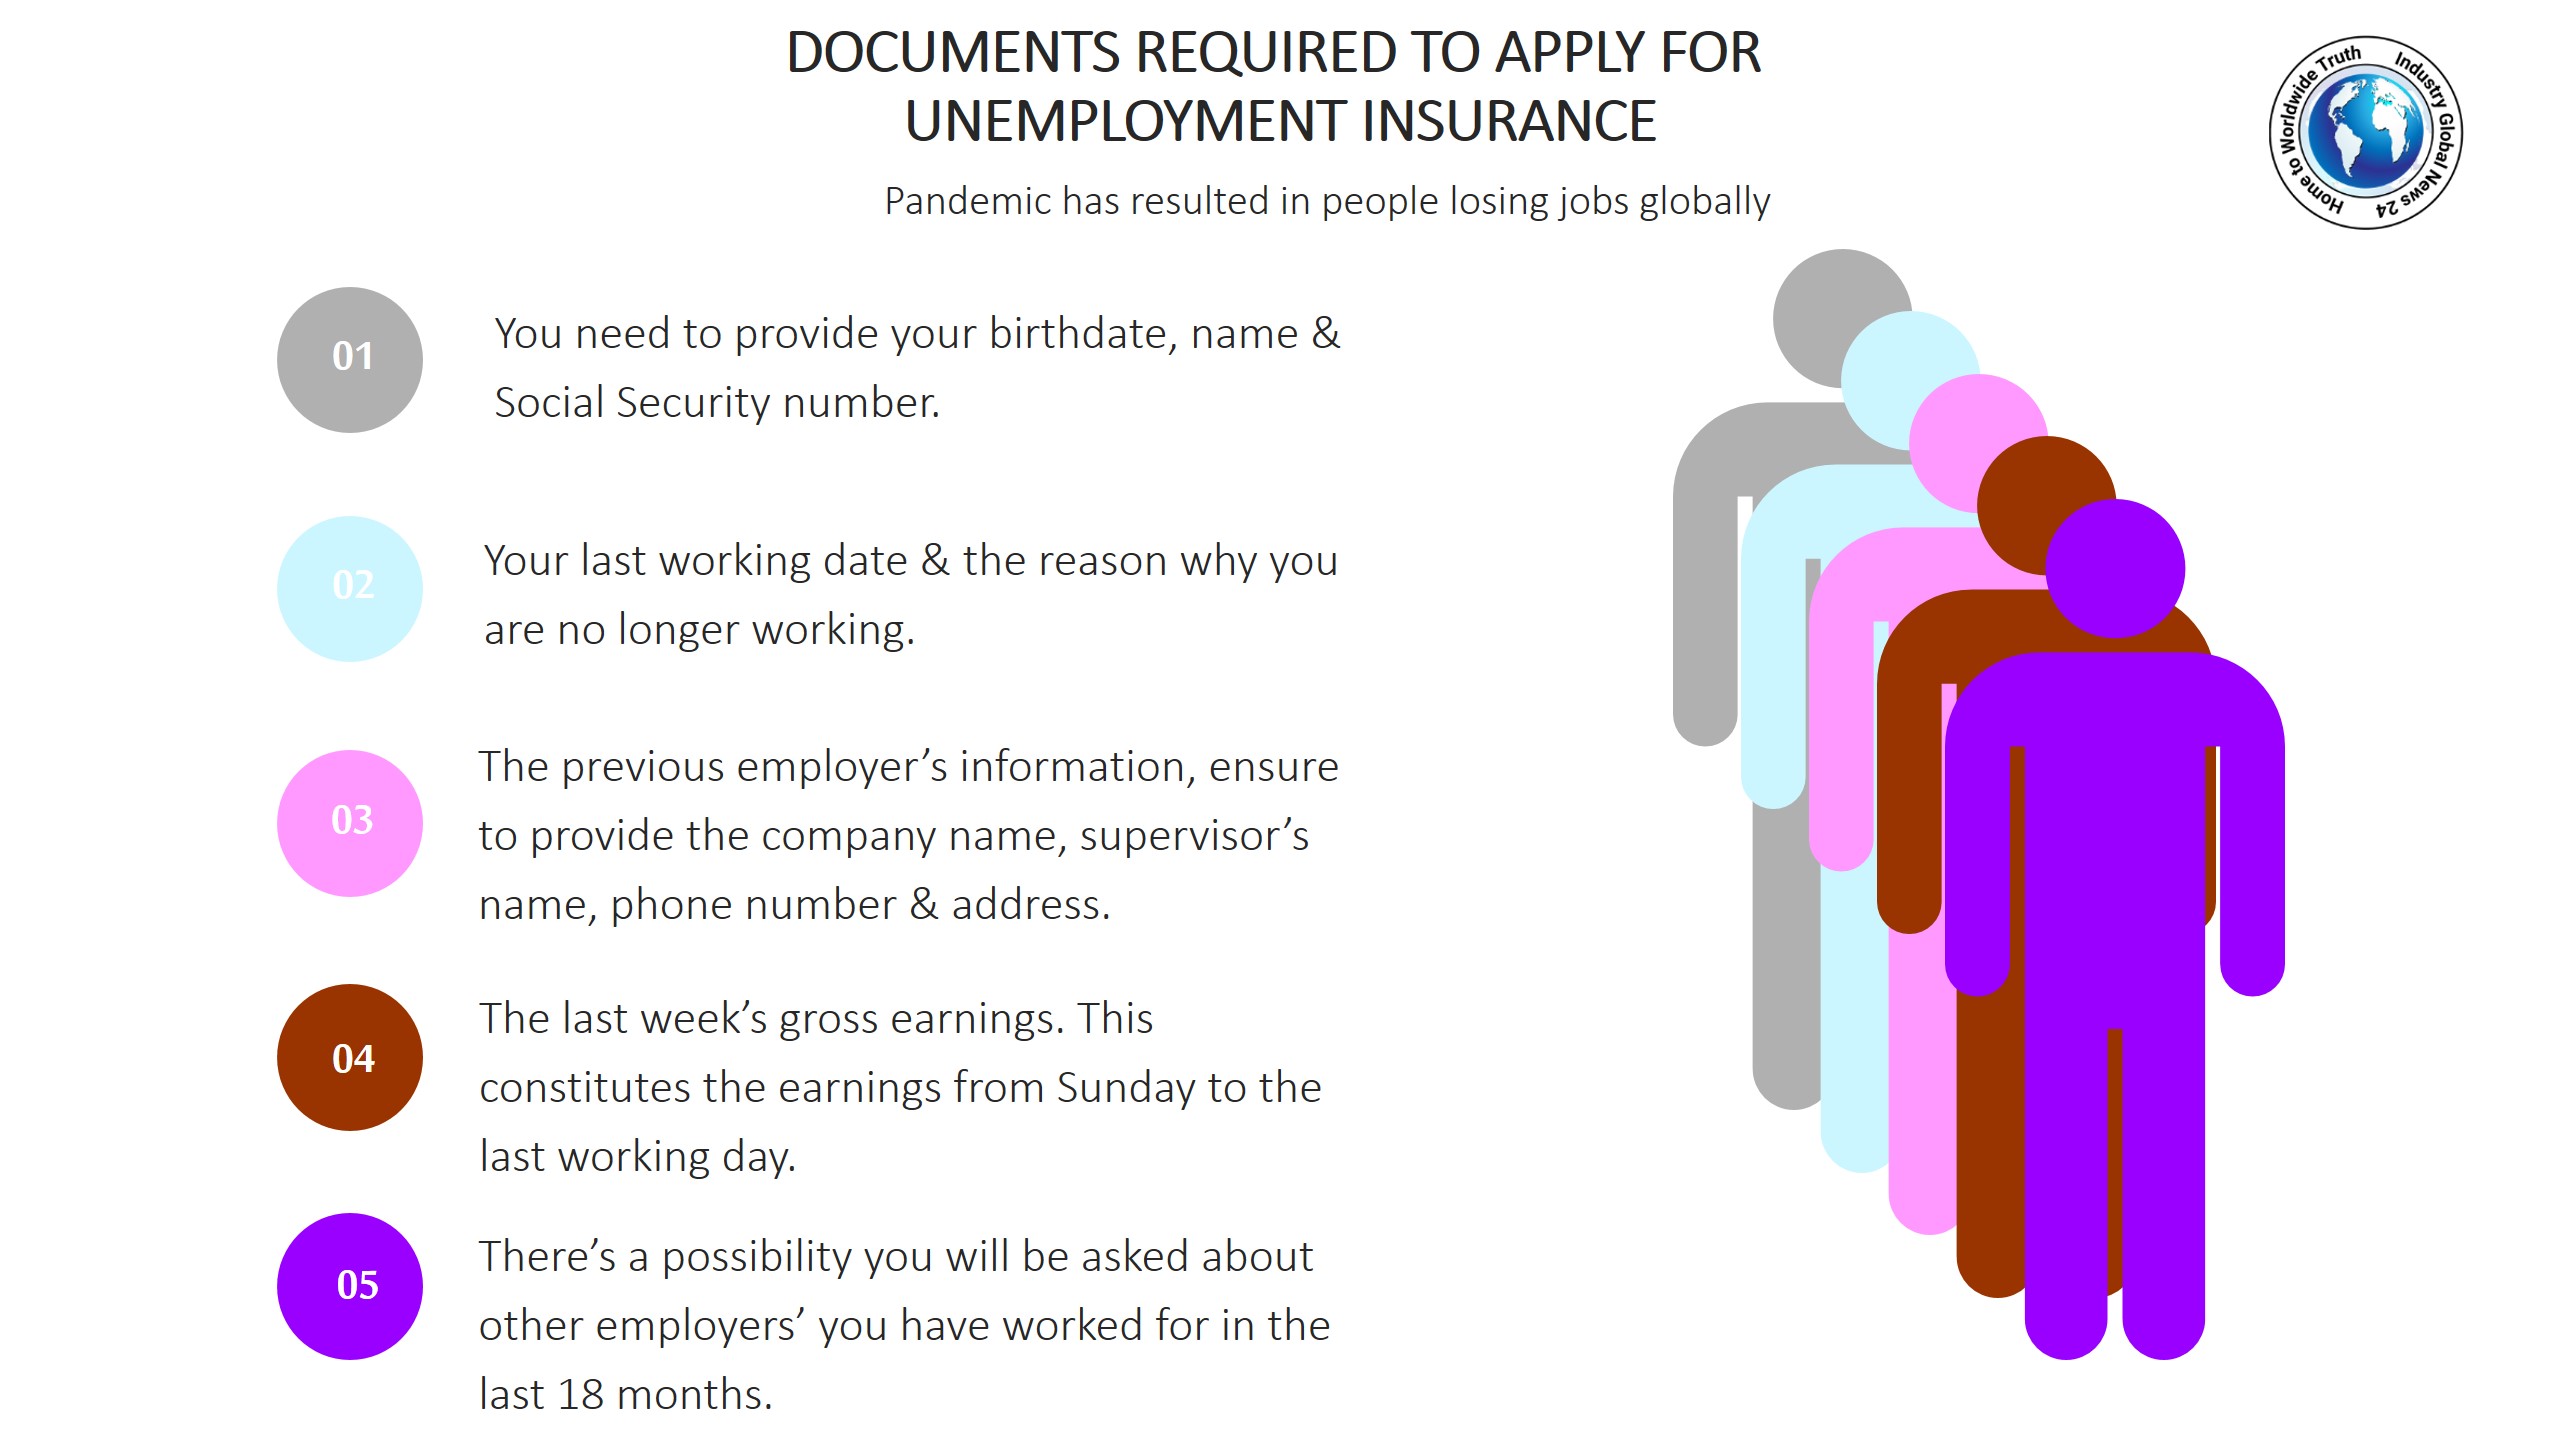 Documents required to apply for unemployment insurance